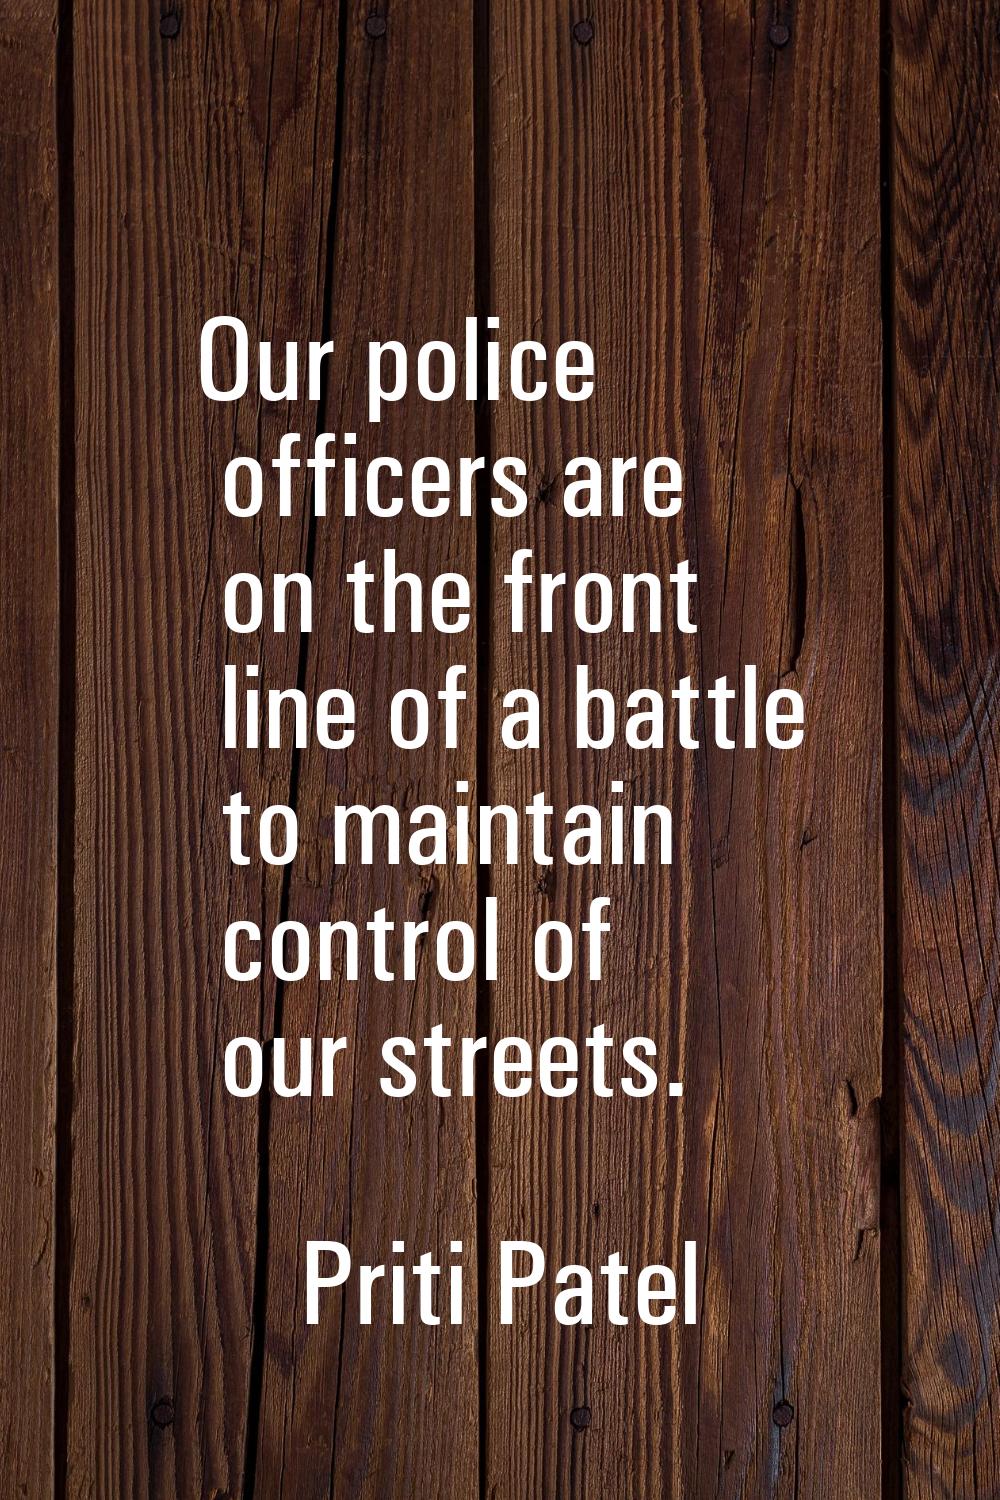 Our police officers are on the front line of a battle to maintain control of our streets.